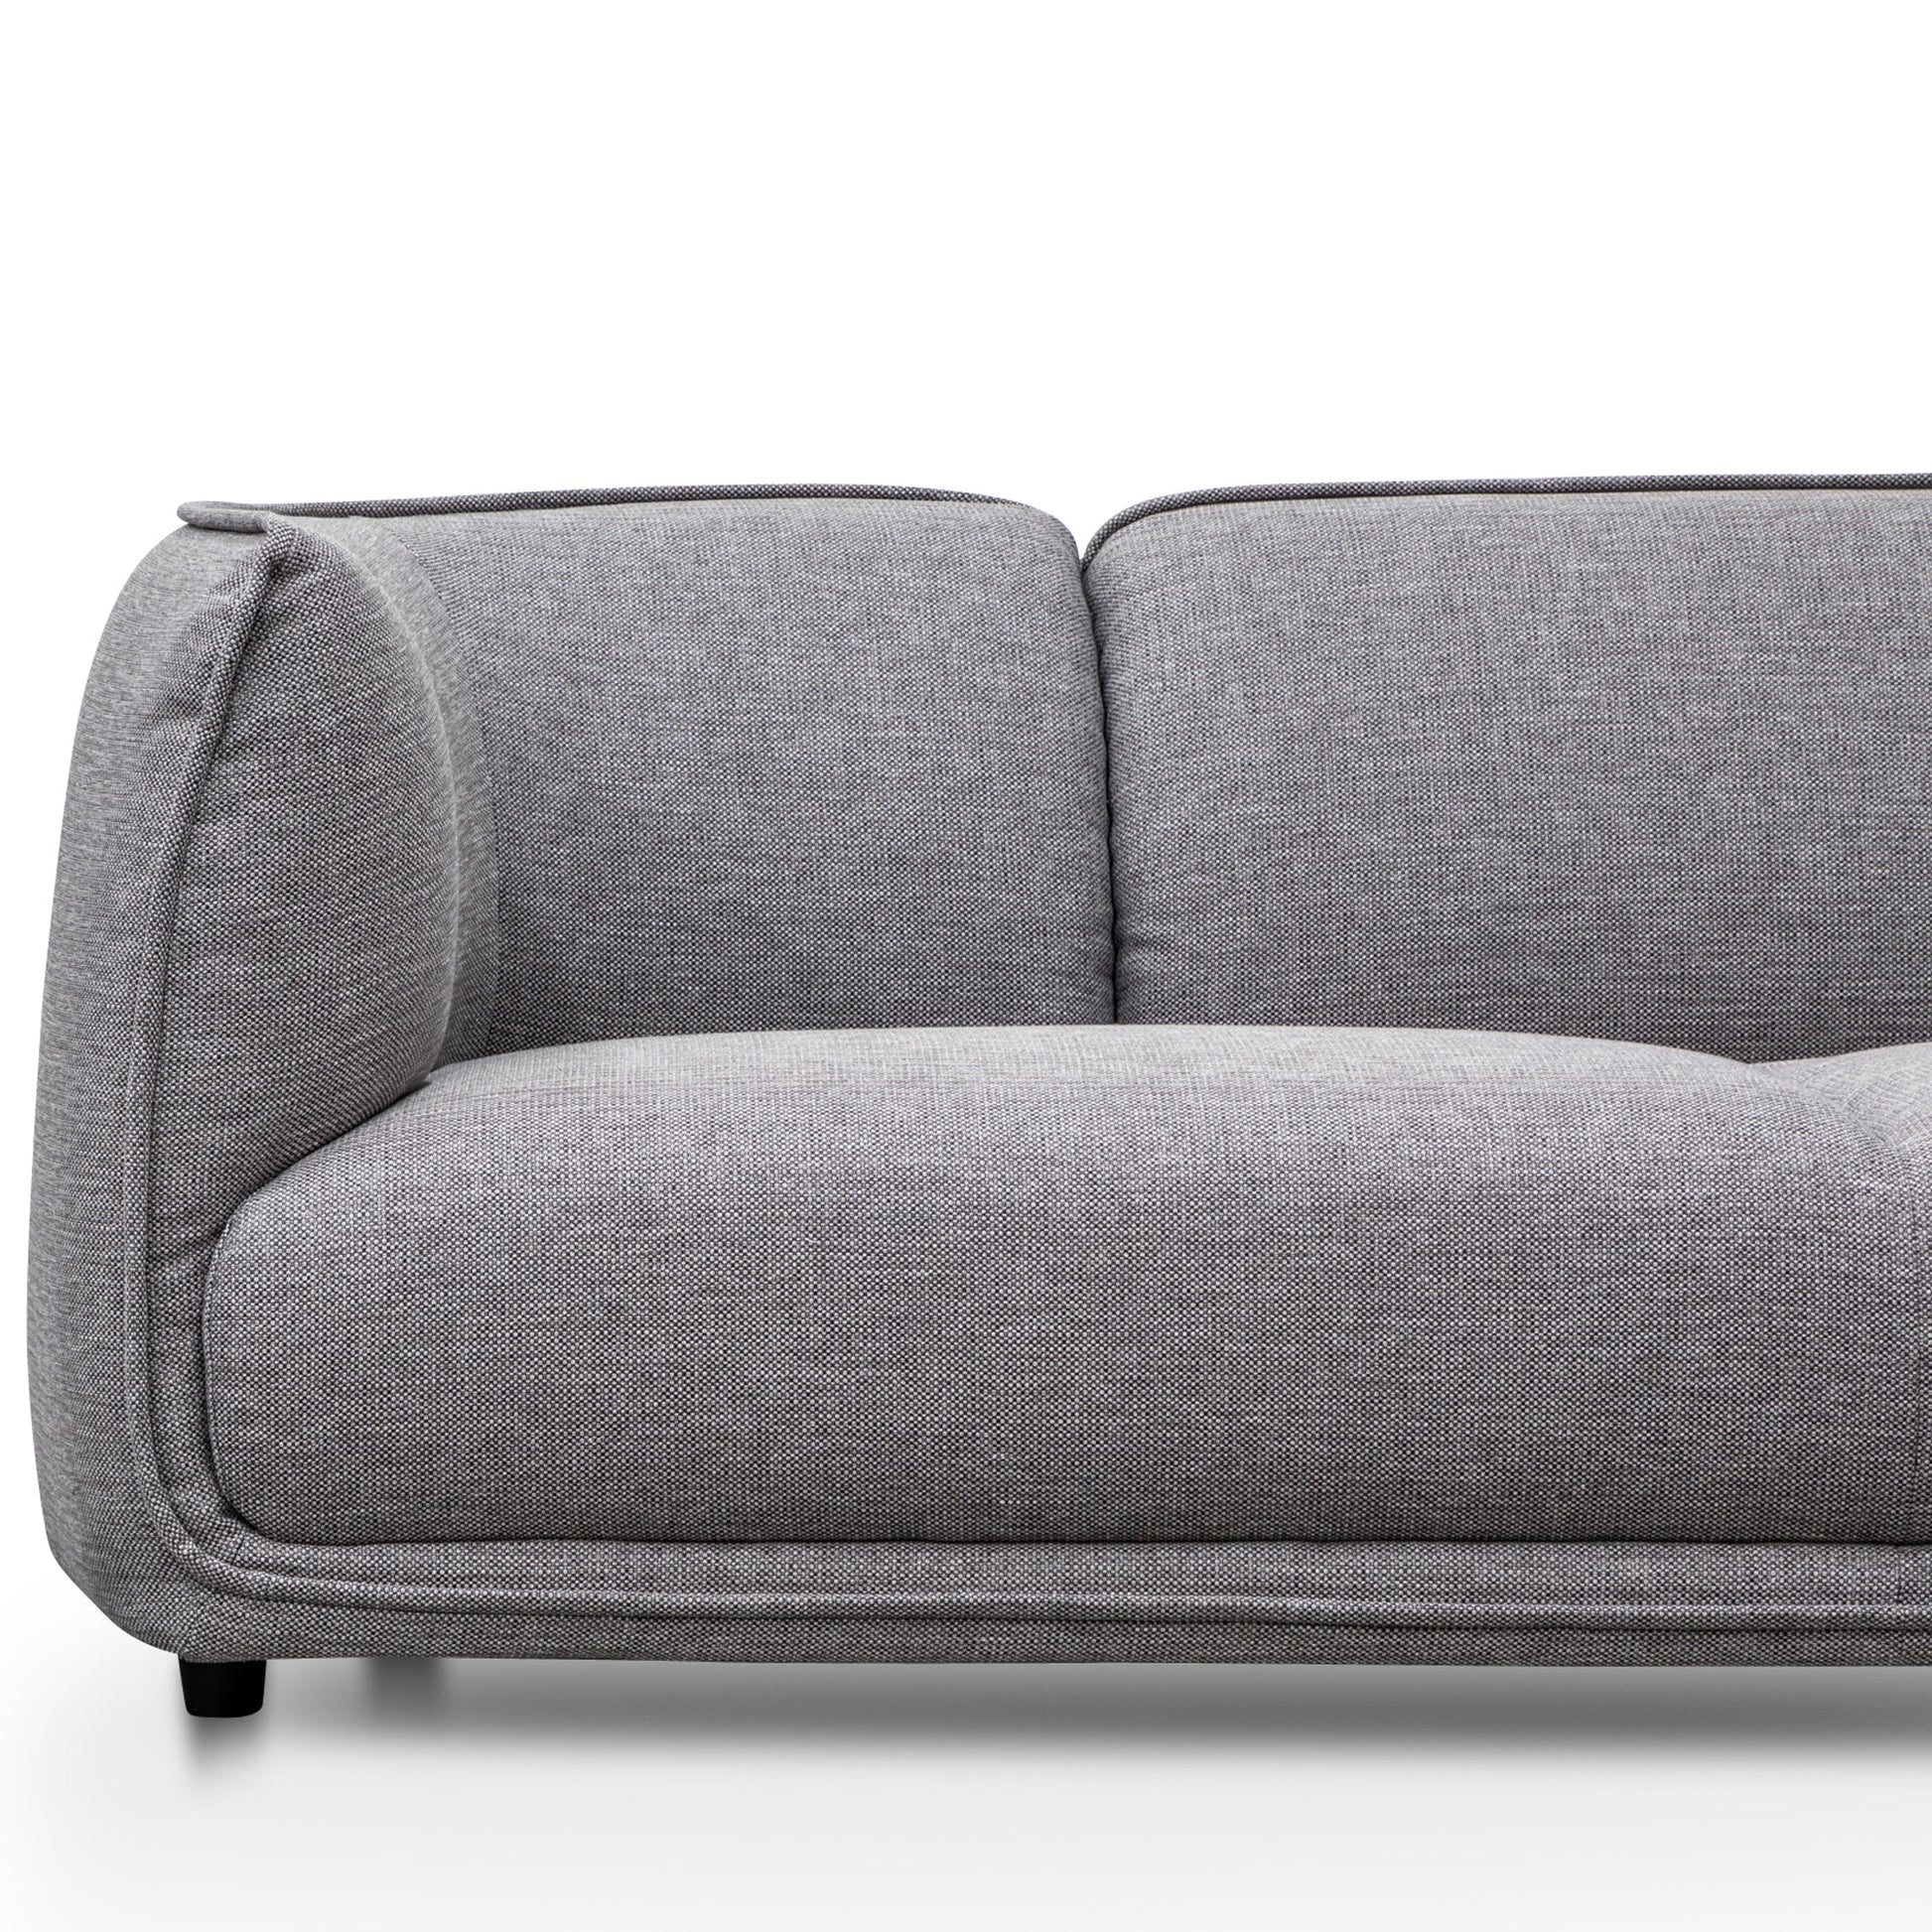 Jacob 3 Seater Left Chaise Sofa - Graphite Grey with Black Legs-3